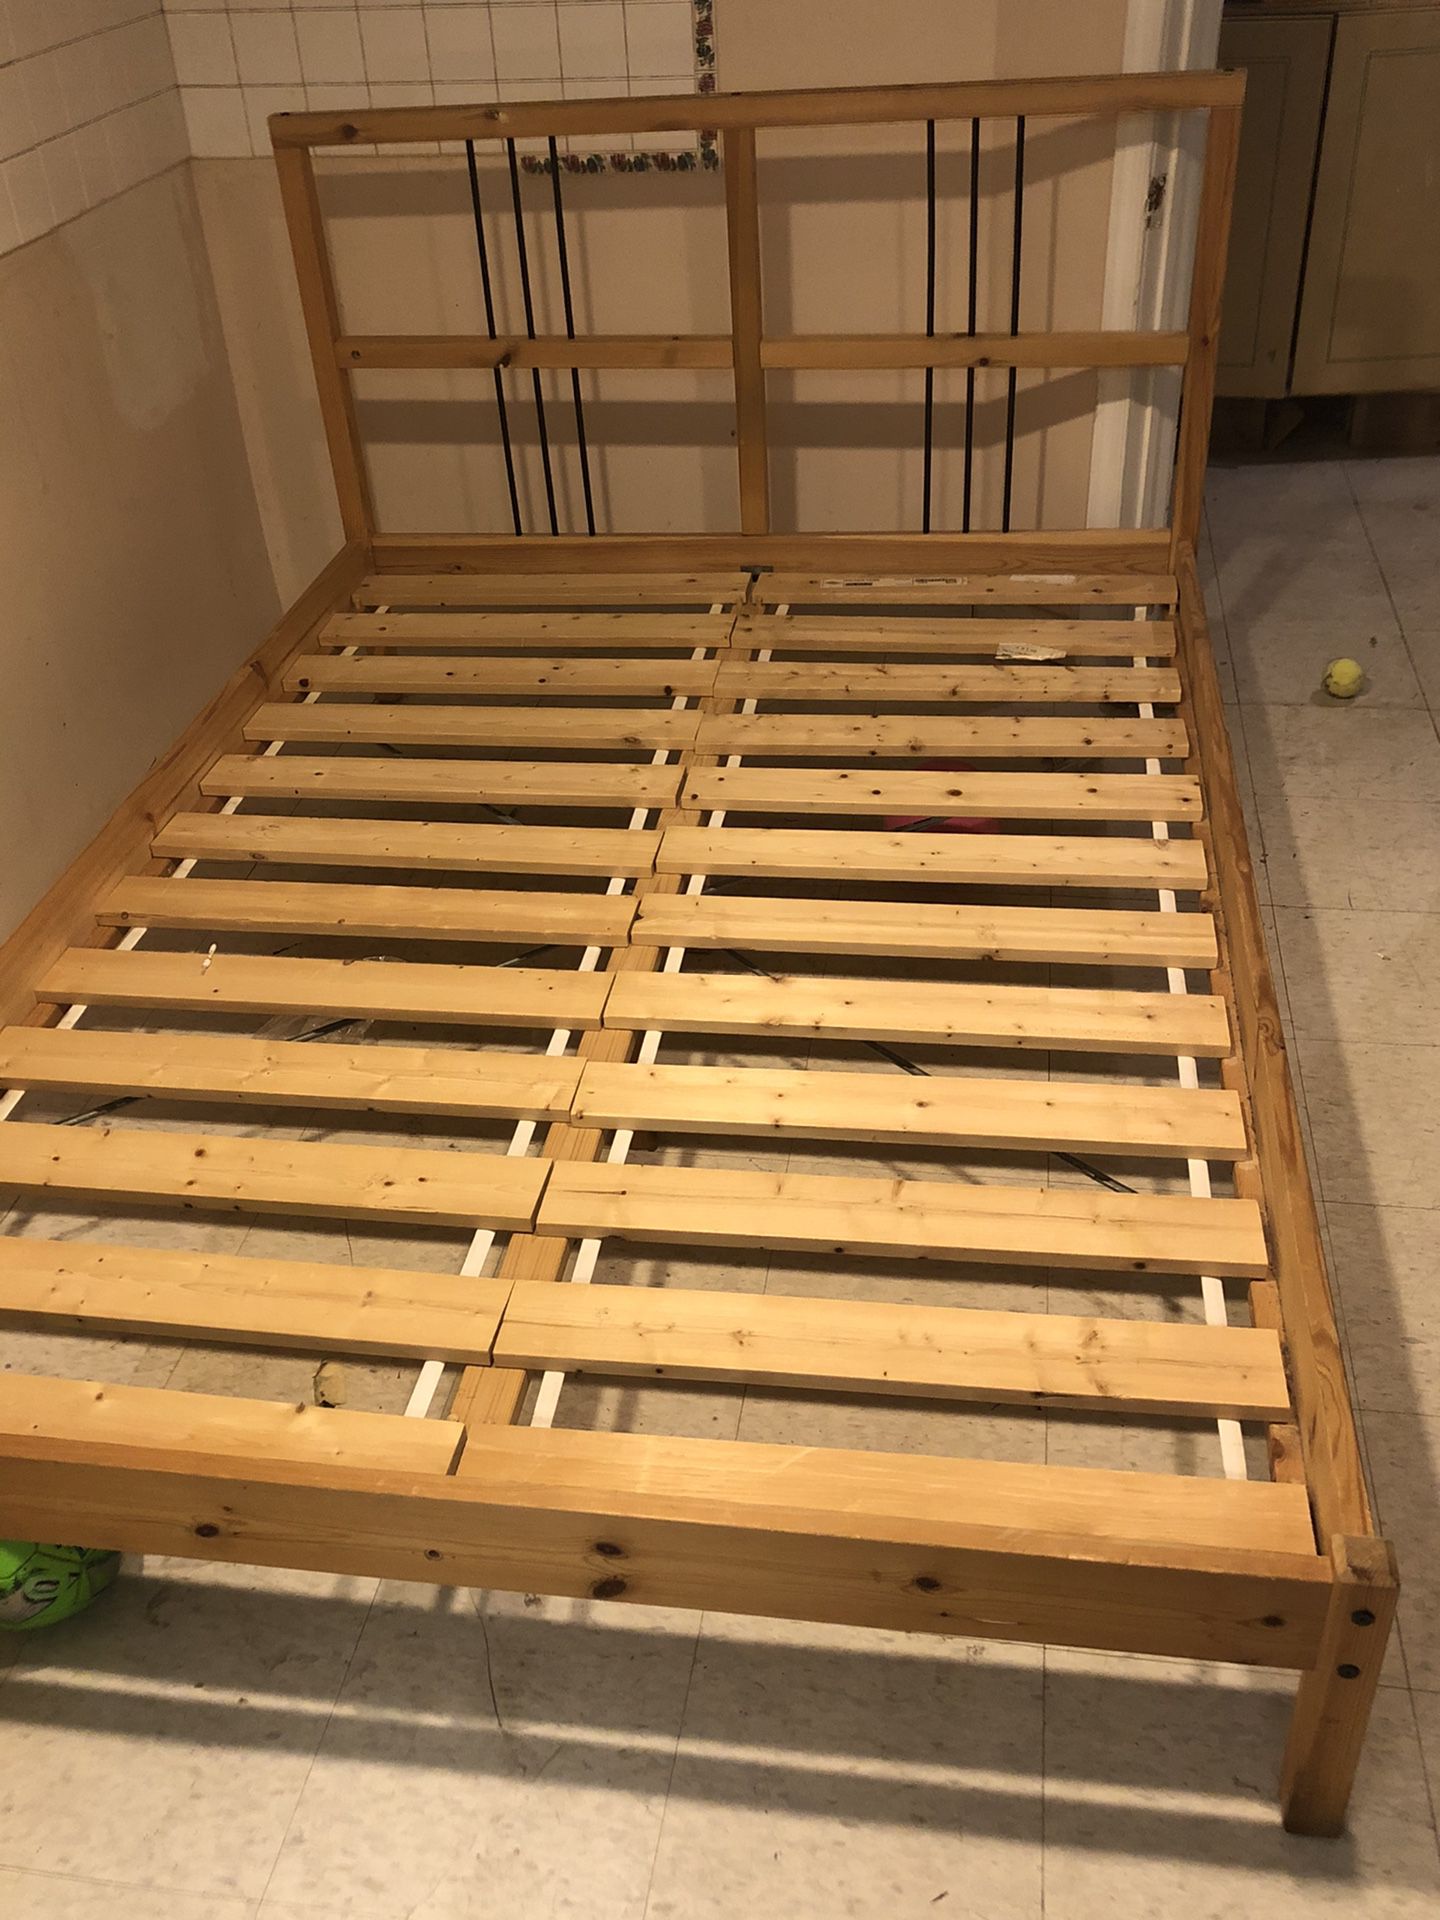 Full/double bed frame and base